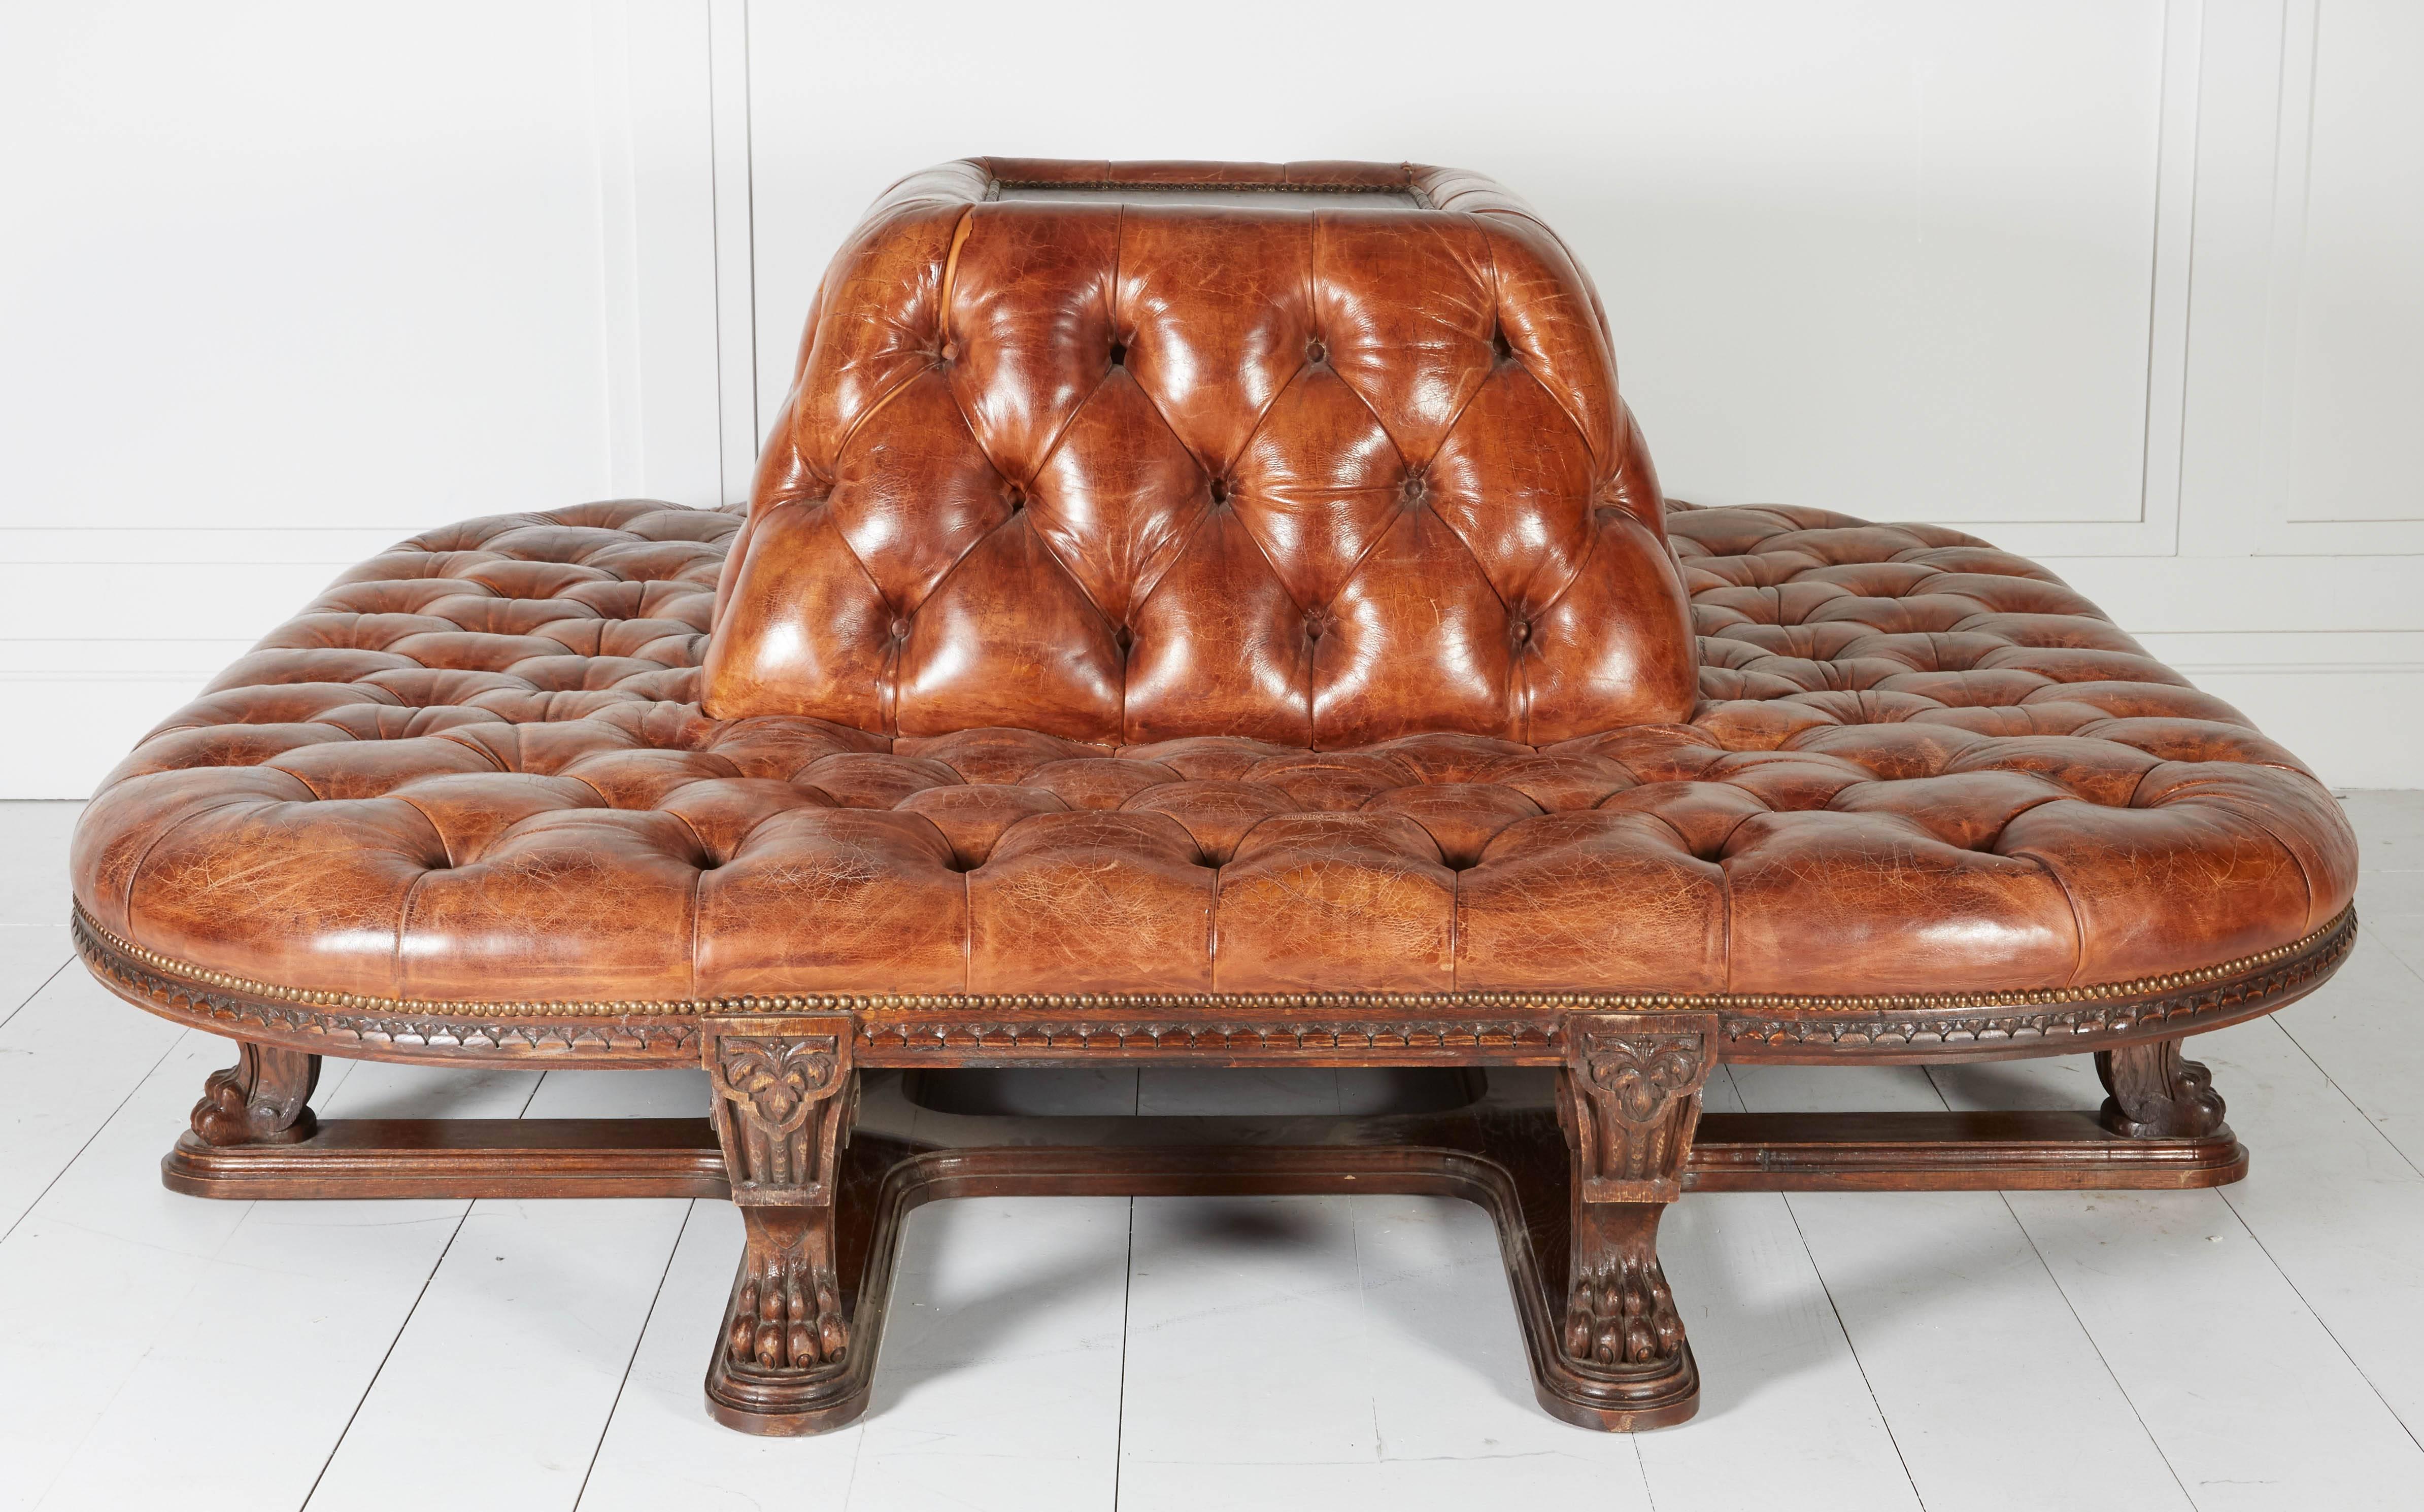 Custom-made, one of a kind tufted leather bench. Adorned with brass nailheads and claw feet legs.
 
Not available for sale or to ship in the state of California.